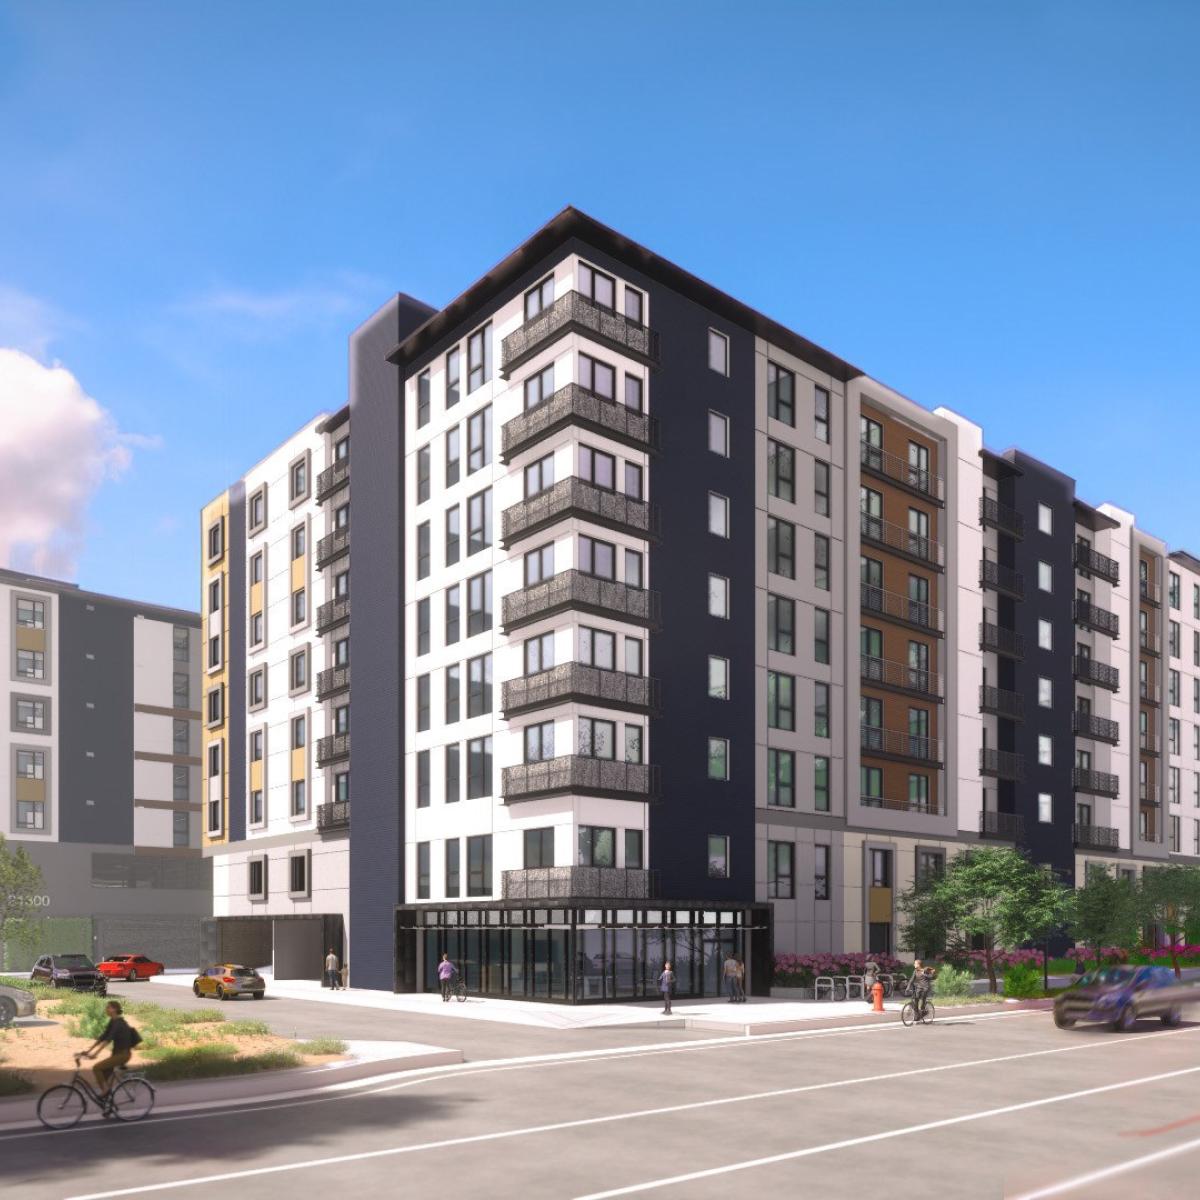 Here's the big affordable housing complex pitched for 21300 W 